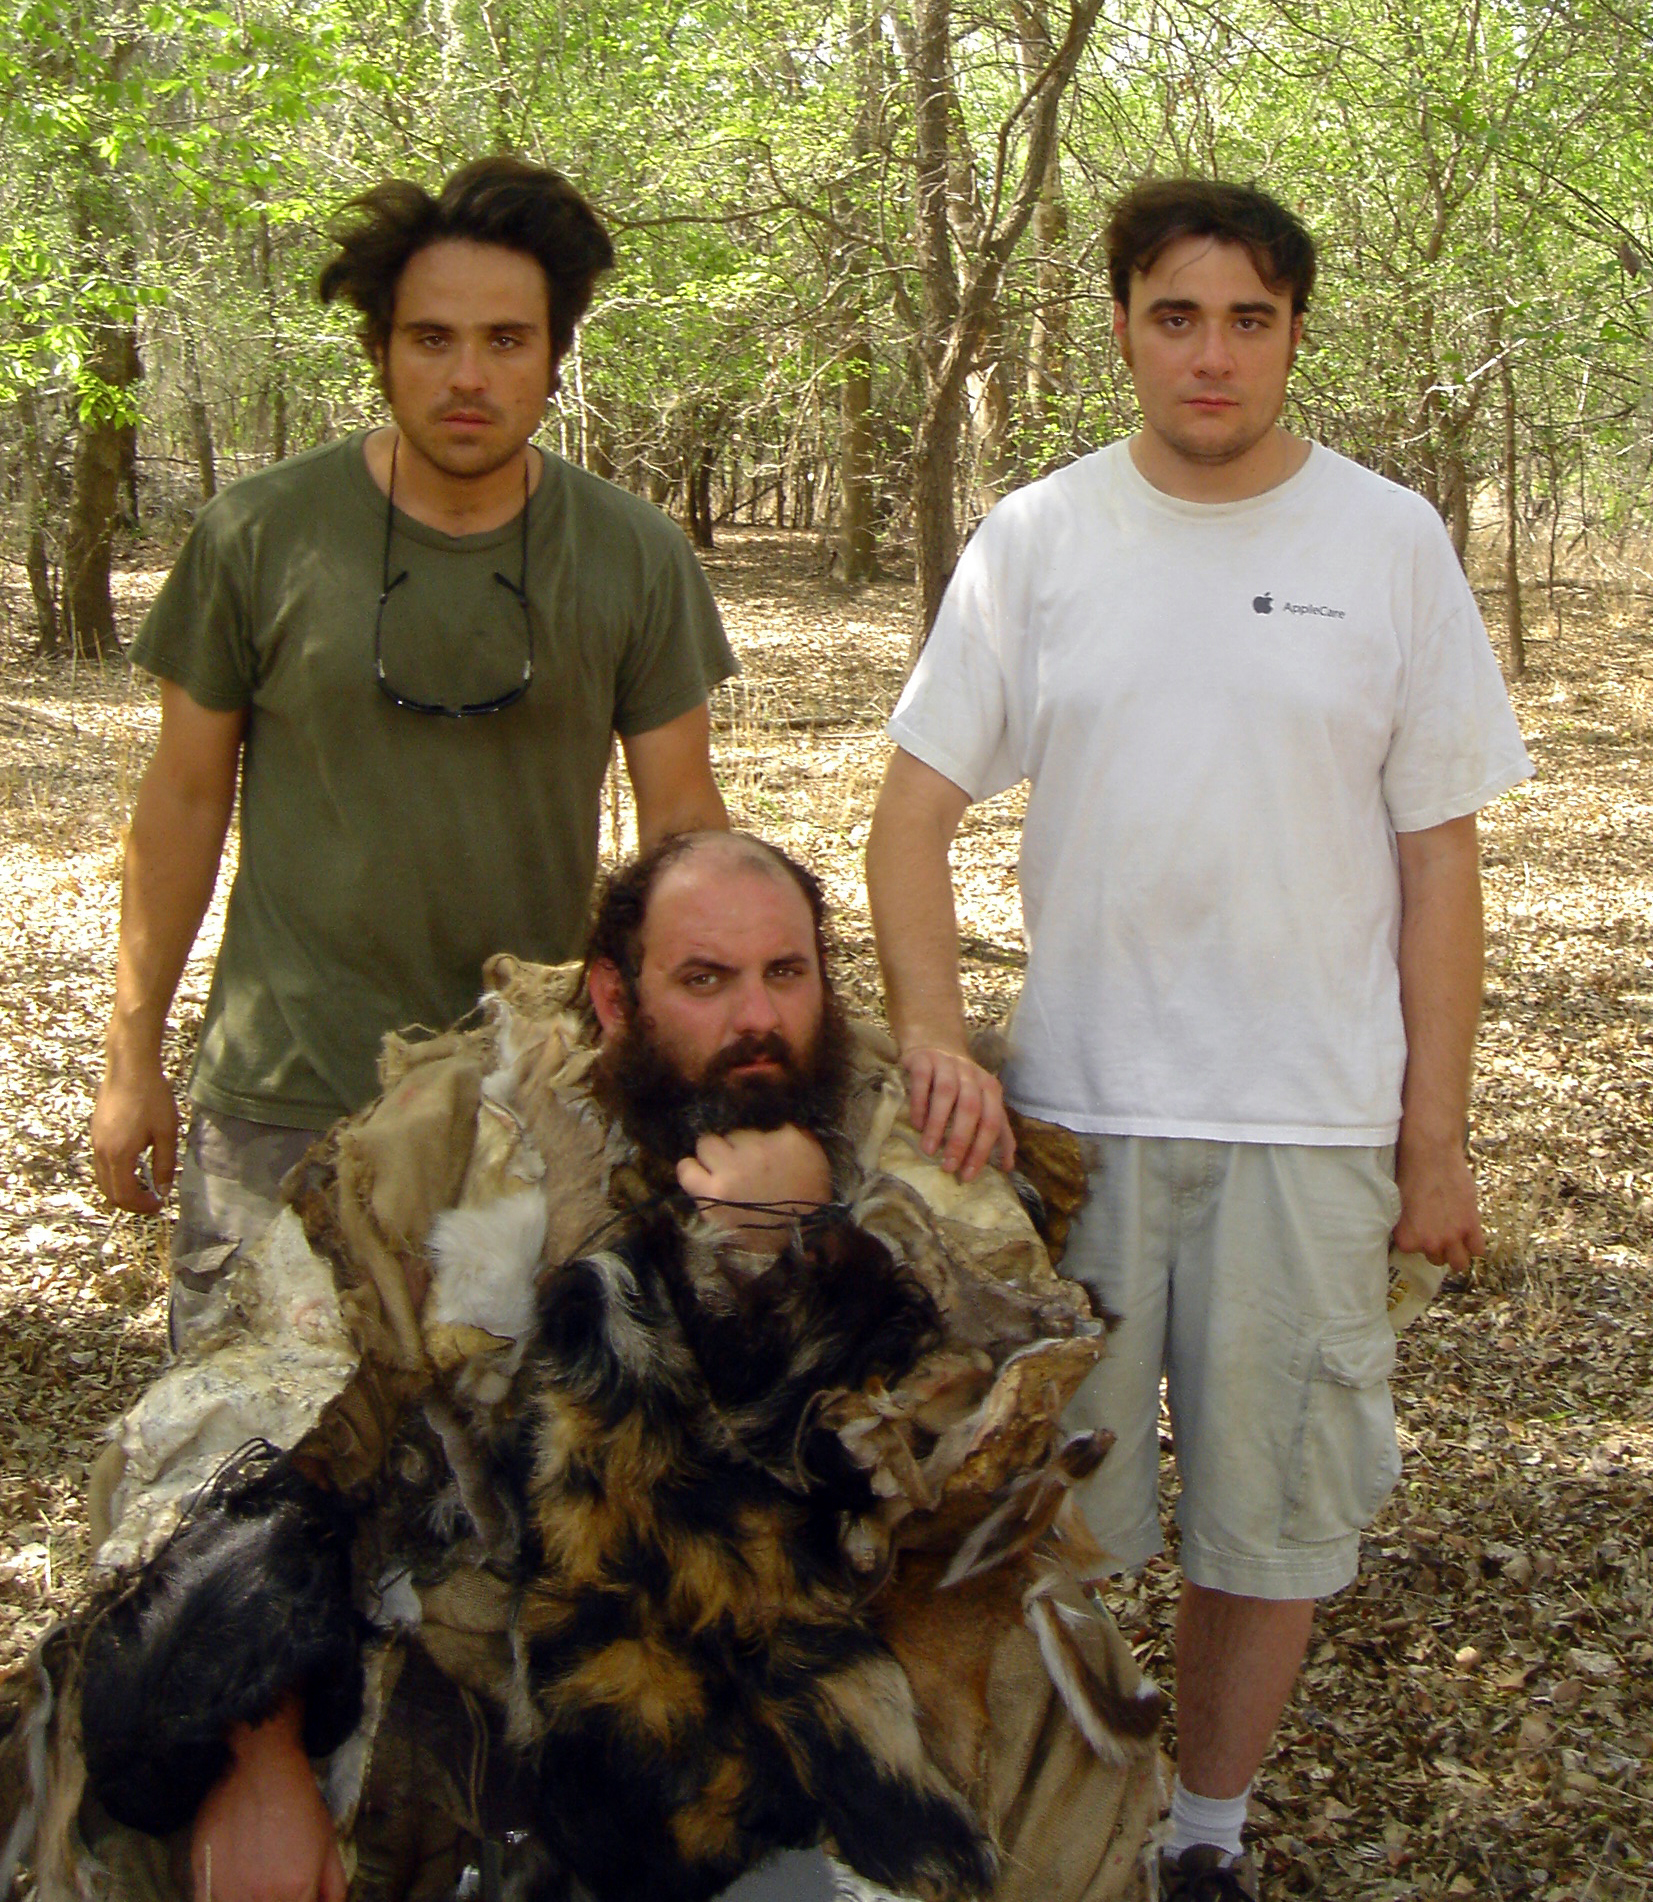 L-R: Justin Meeks, Tony Wolford, Duane Graves on set of THE WILD MAN OF THE NAVIDAD, April, 2006